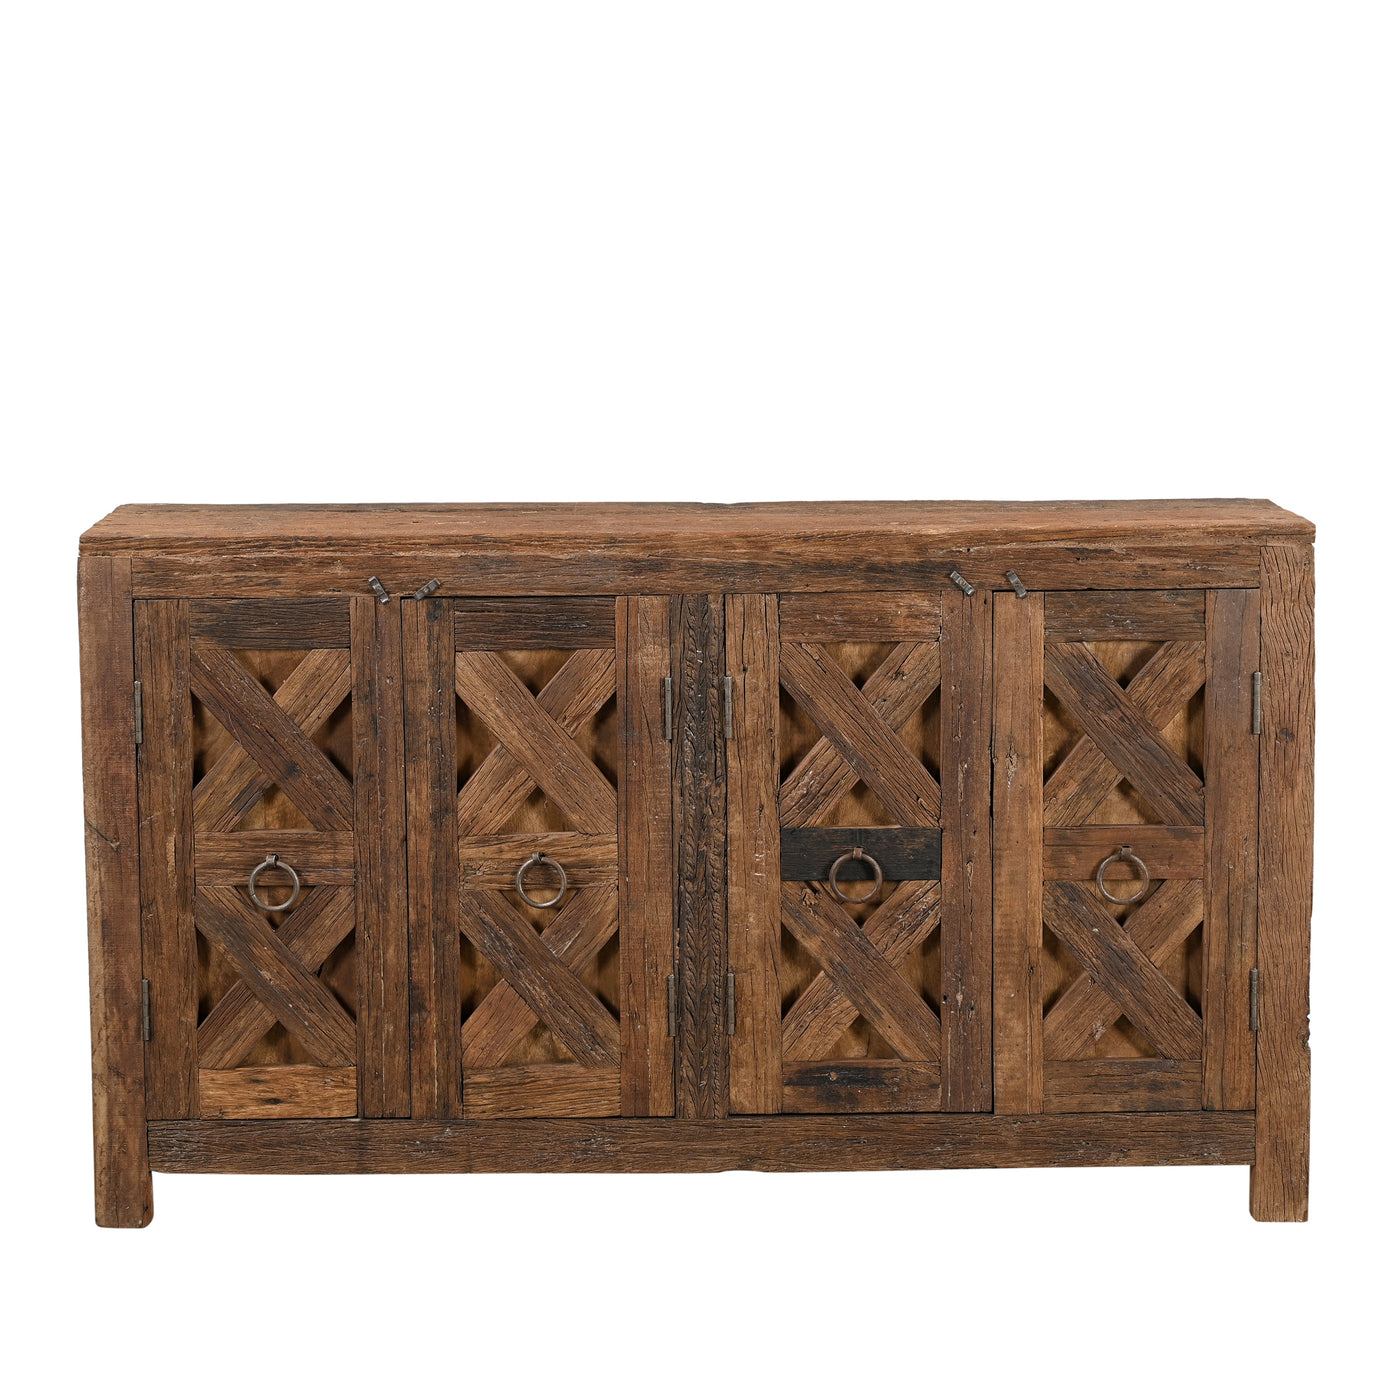 Dhayalon - old wooden buffet